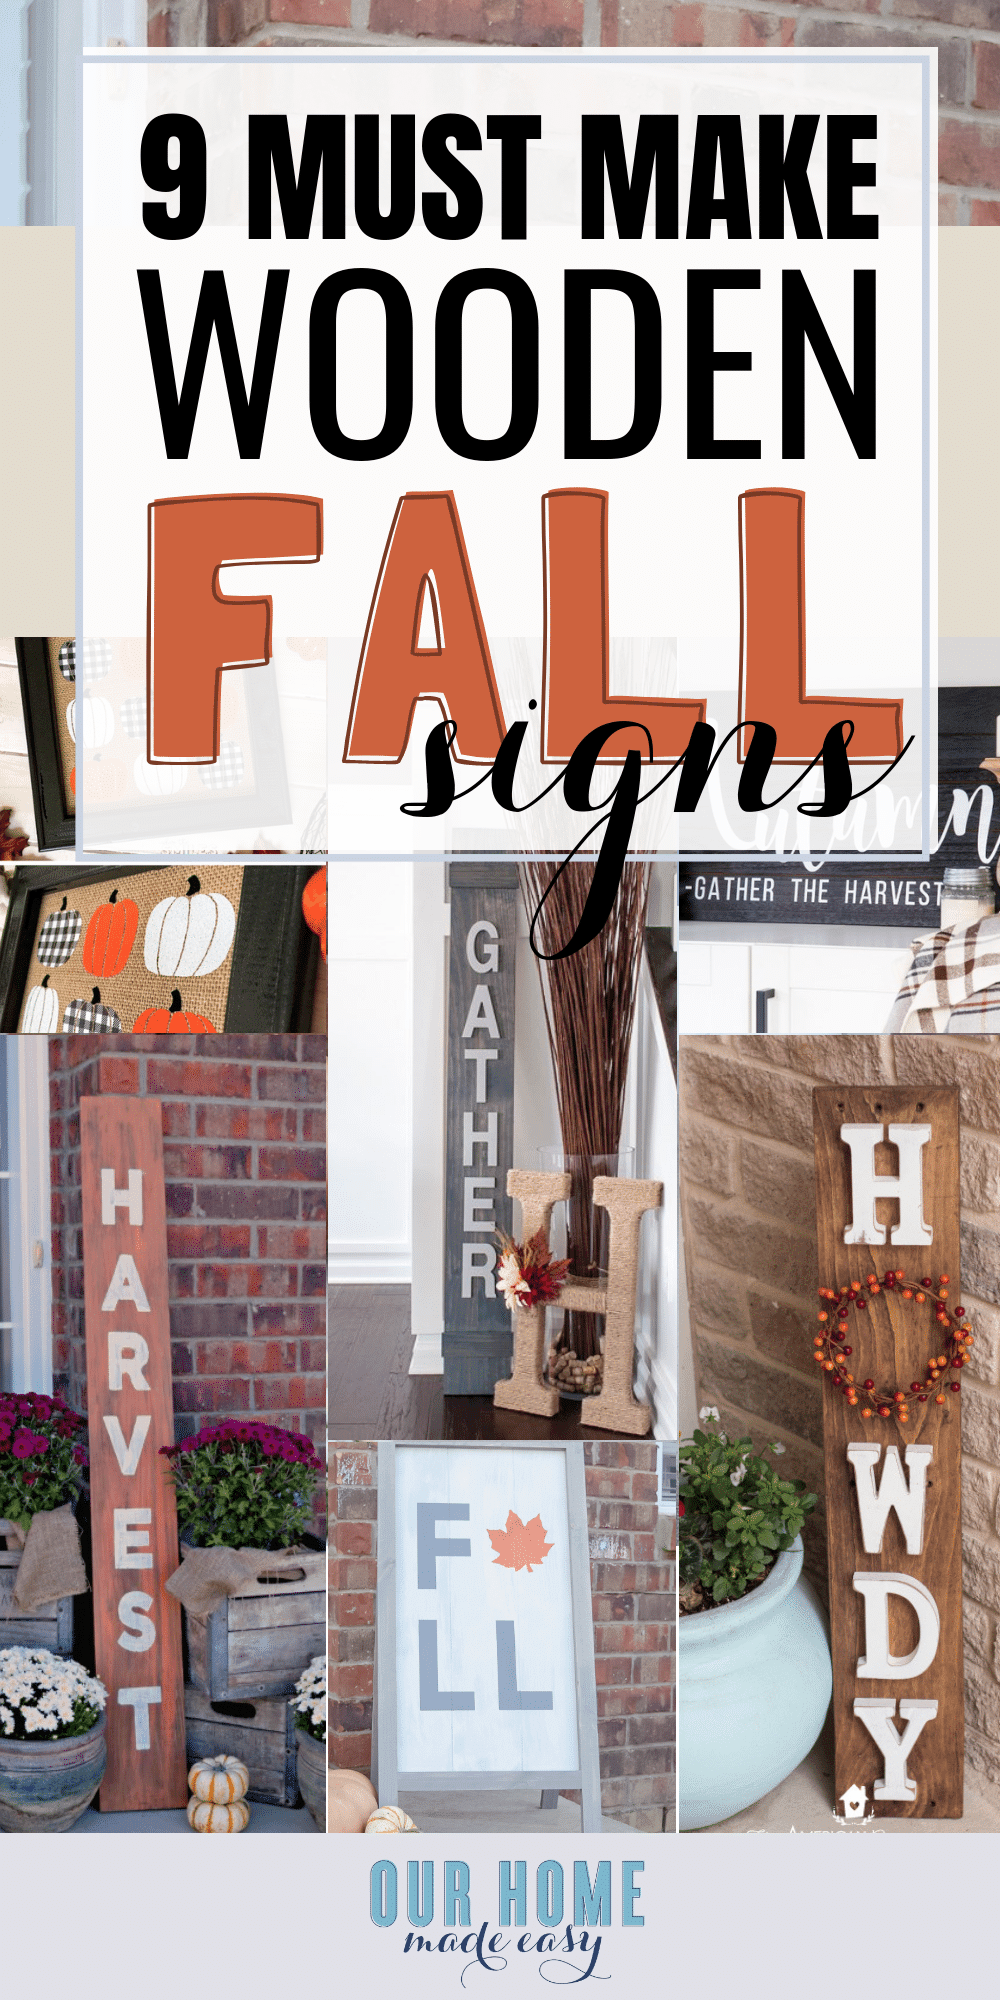 10 Easy Diy Fall Wood Signs To Make